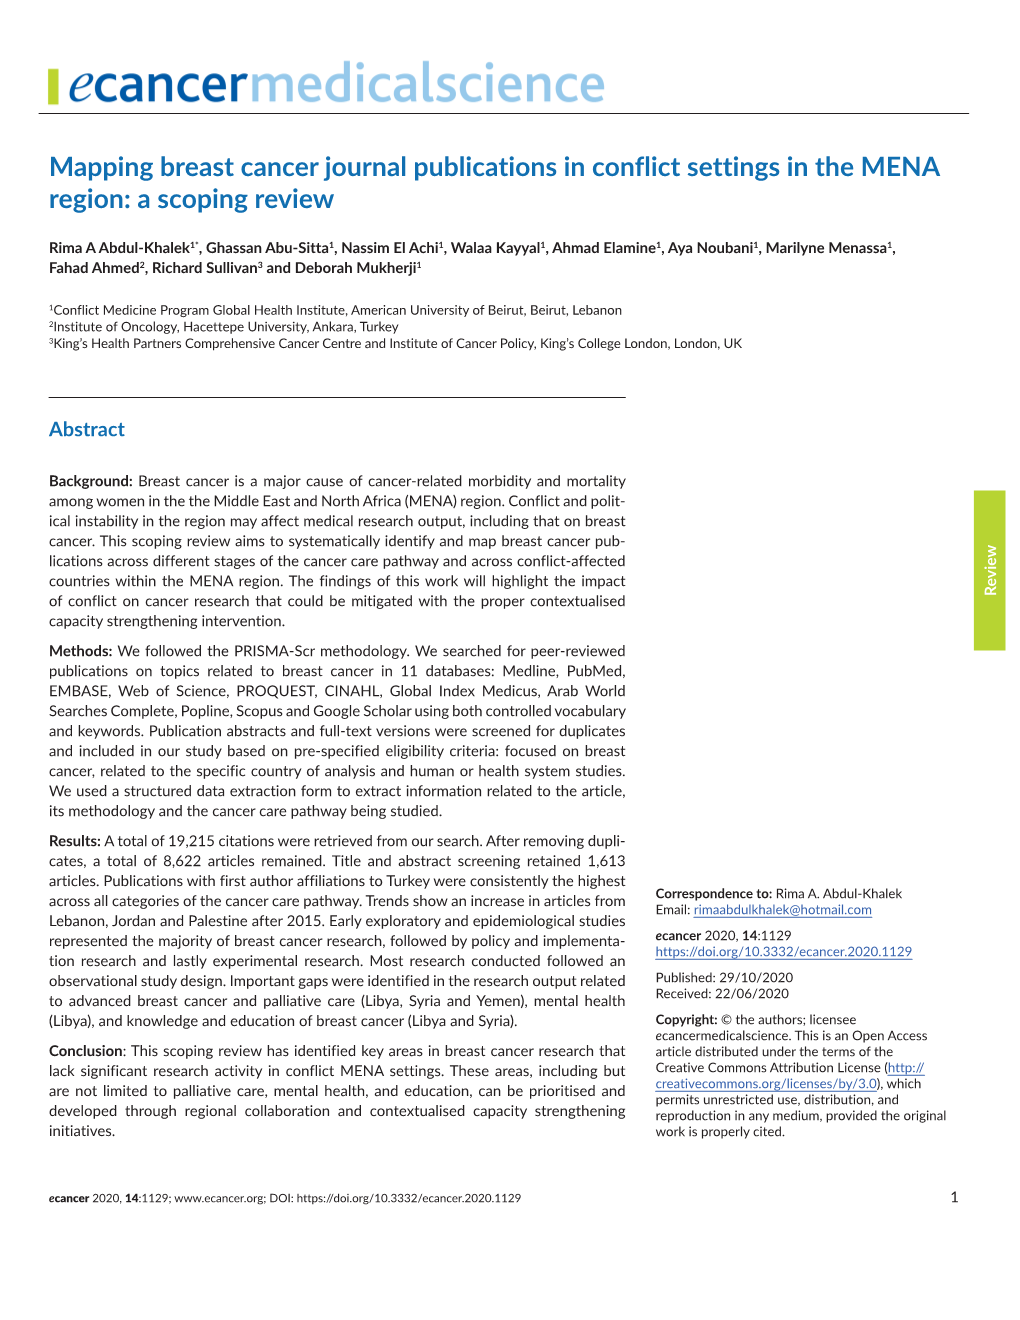 Mapping Breast Cancer Journal Publications in Conflict Settings in the MENA Region: a Scoping Review